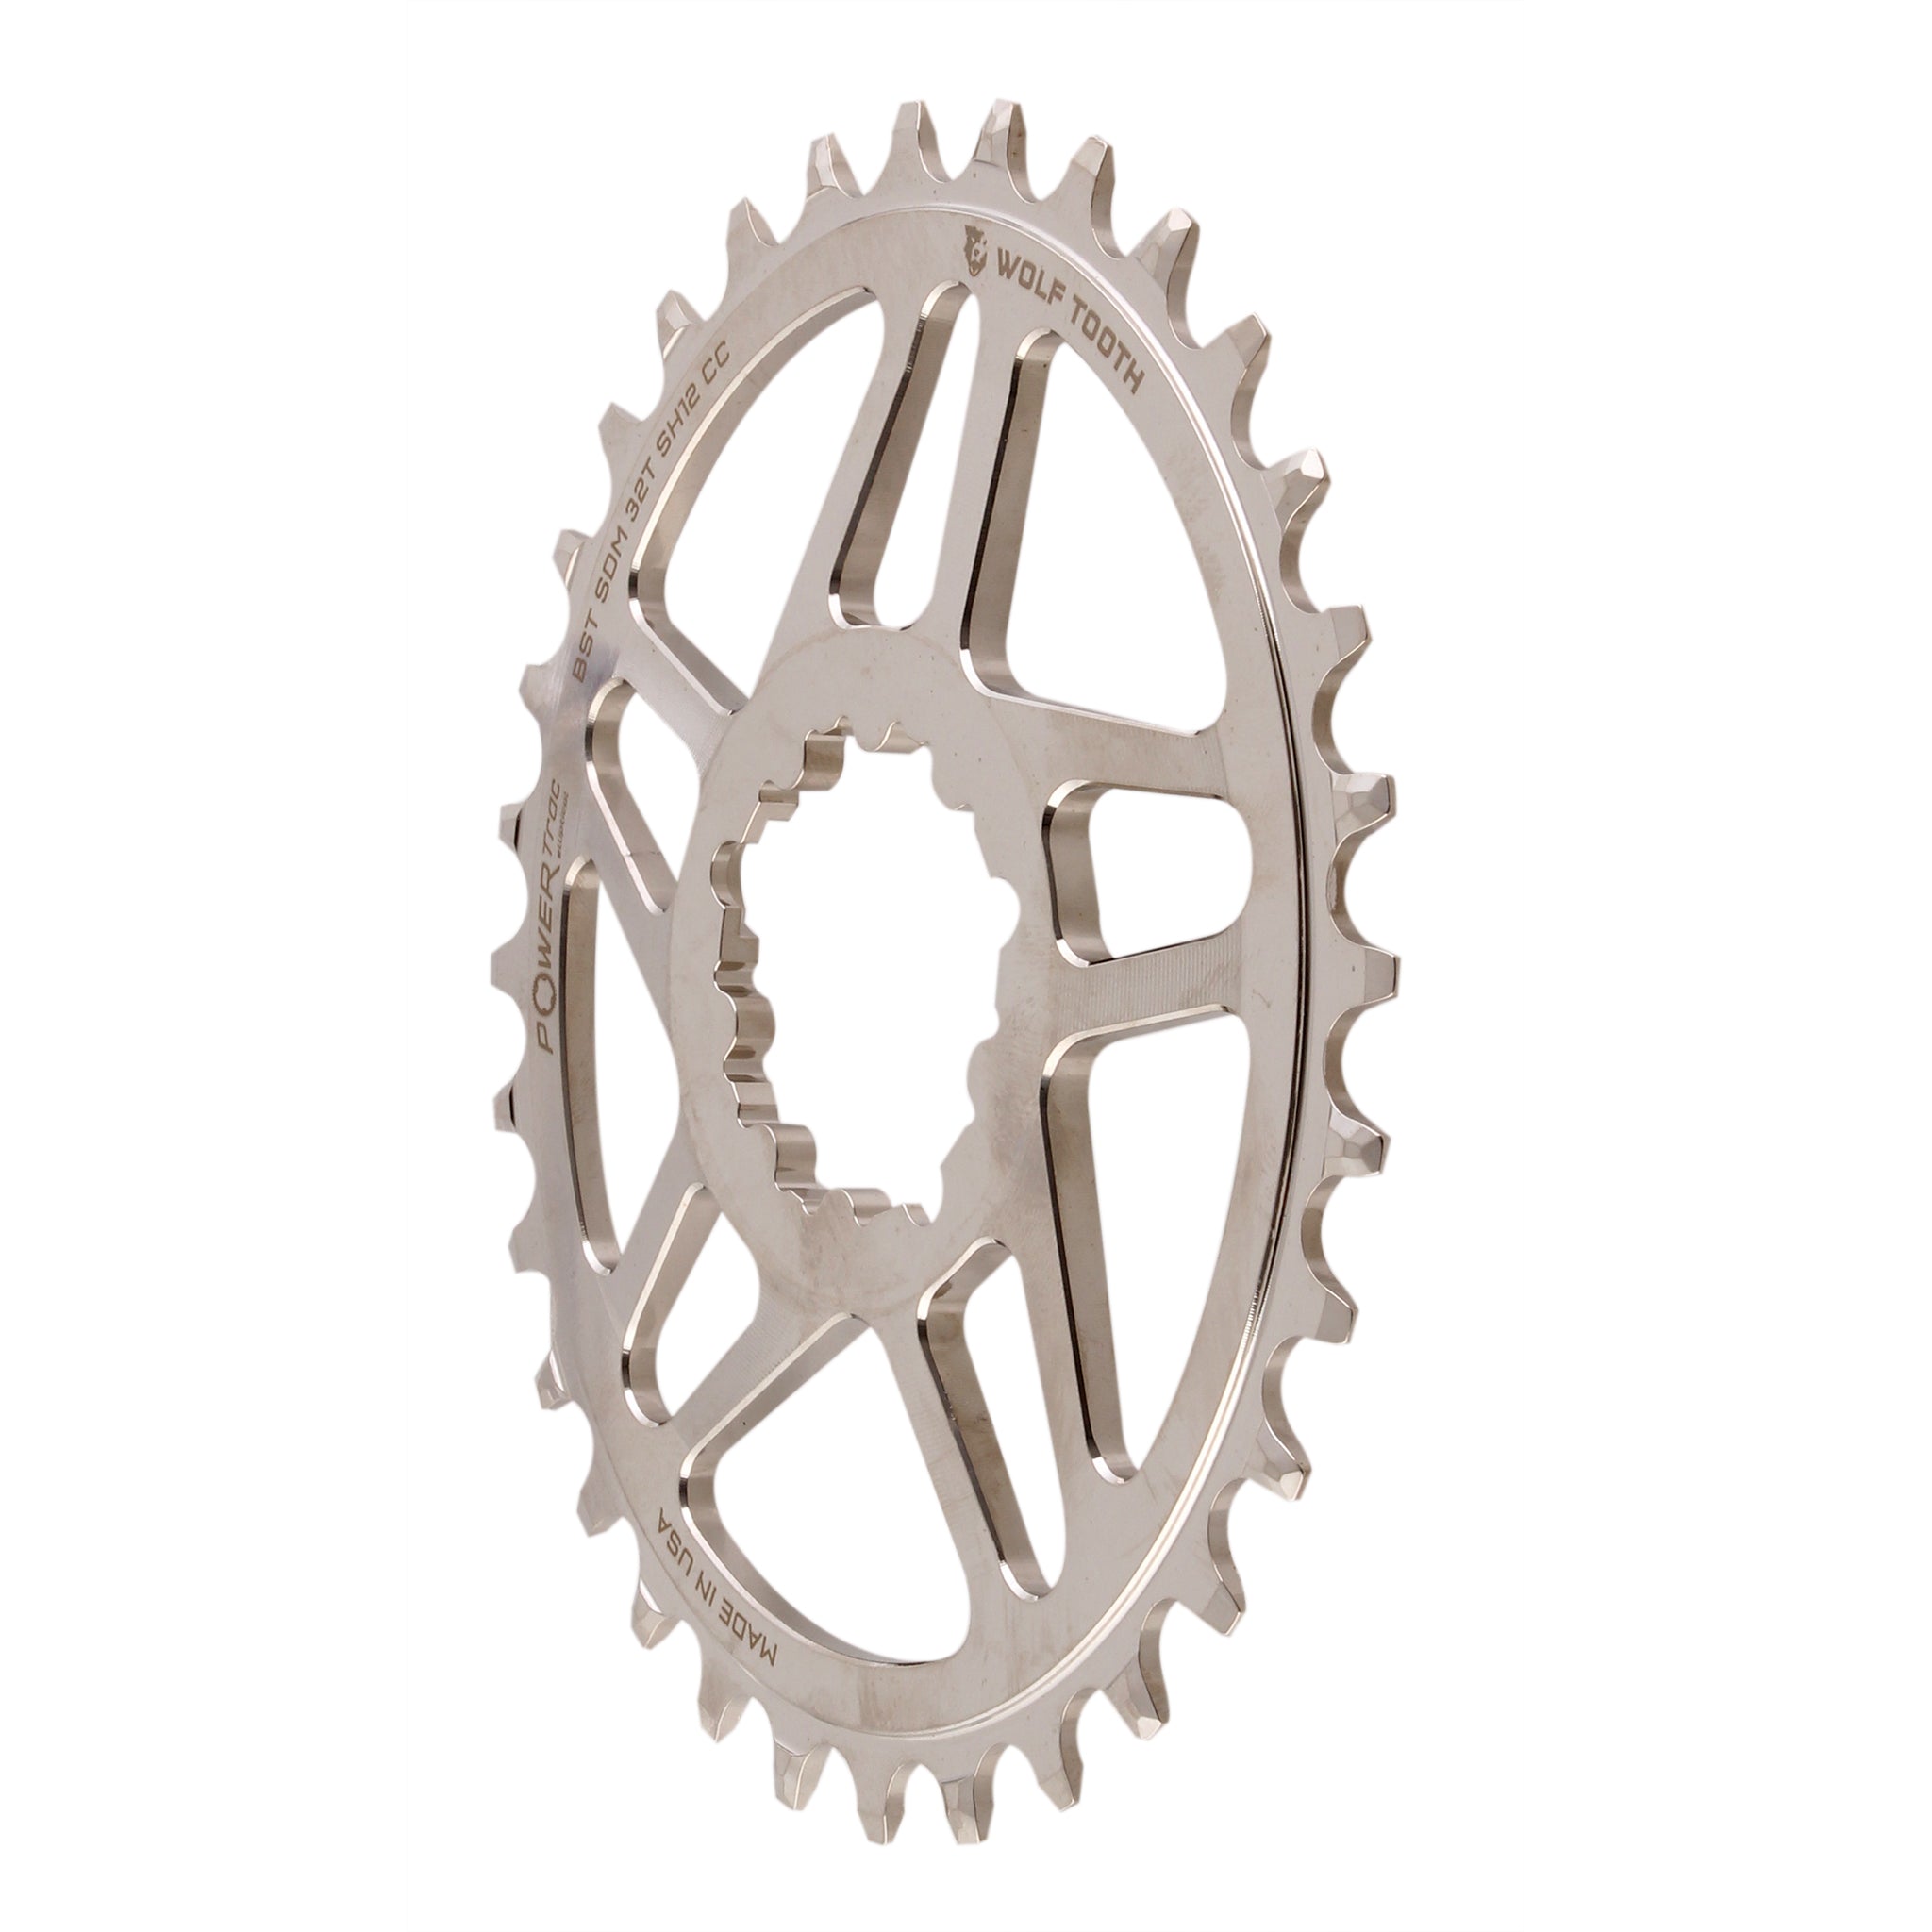 Wolf Tooth Elliptical Direct Mount Chainring - 32t SRAM Direct Mount For SRAM 3-Bolt Boost Cranks Use Hyperglide+ Chain Nickel Plated